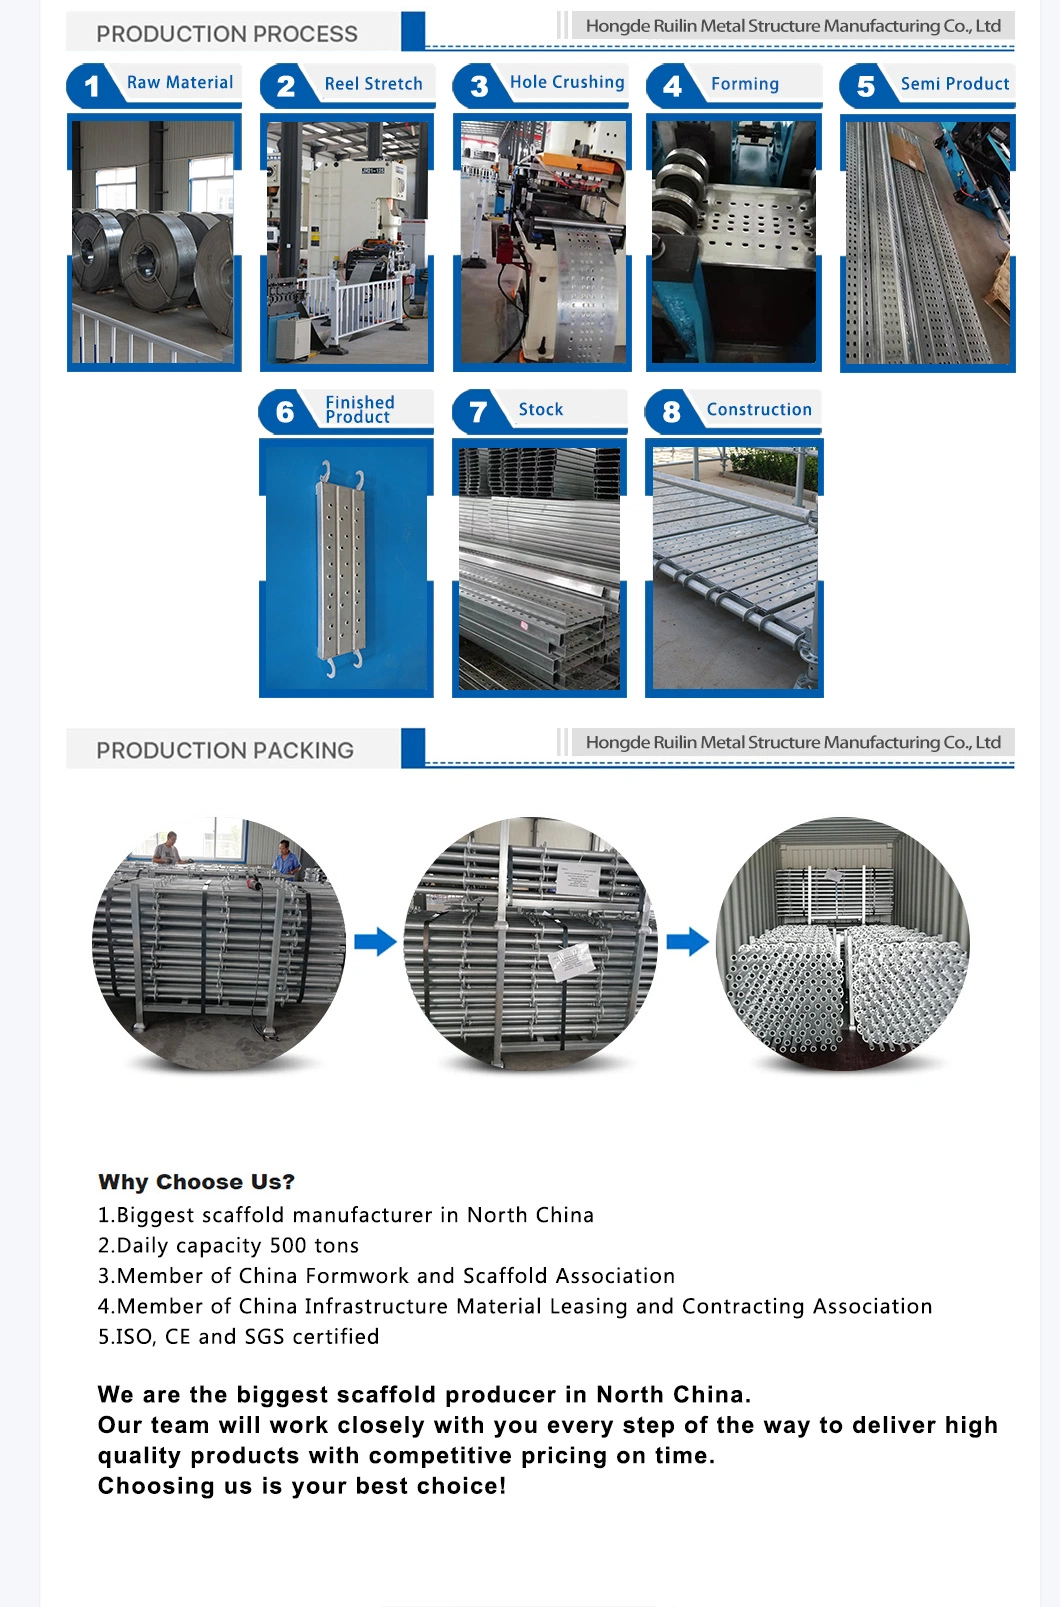 Stainless Steel Ringlock Standards Scaffolding Usage/Application: Industrial